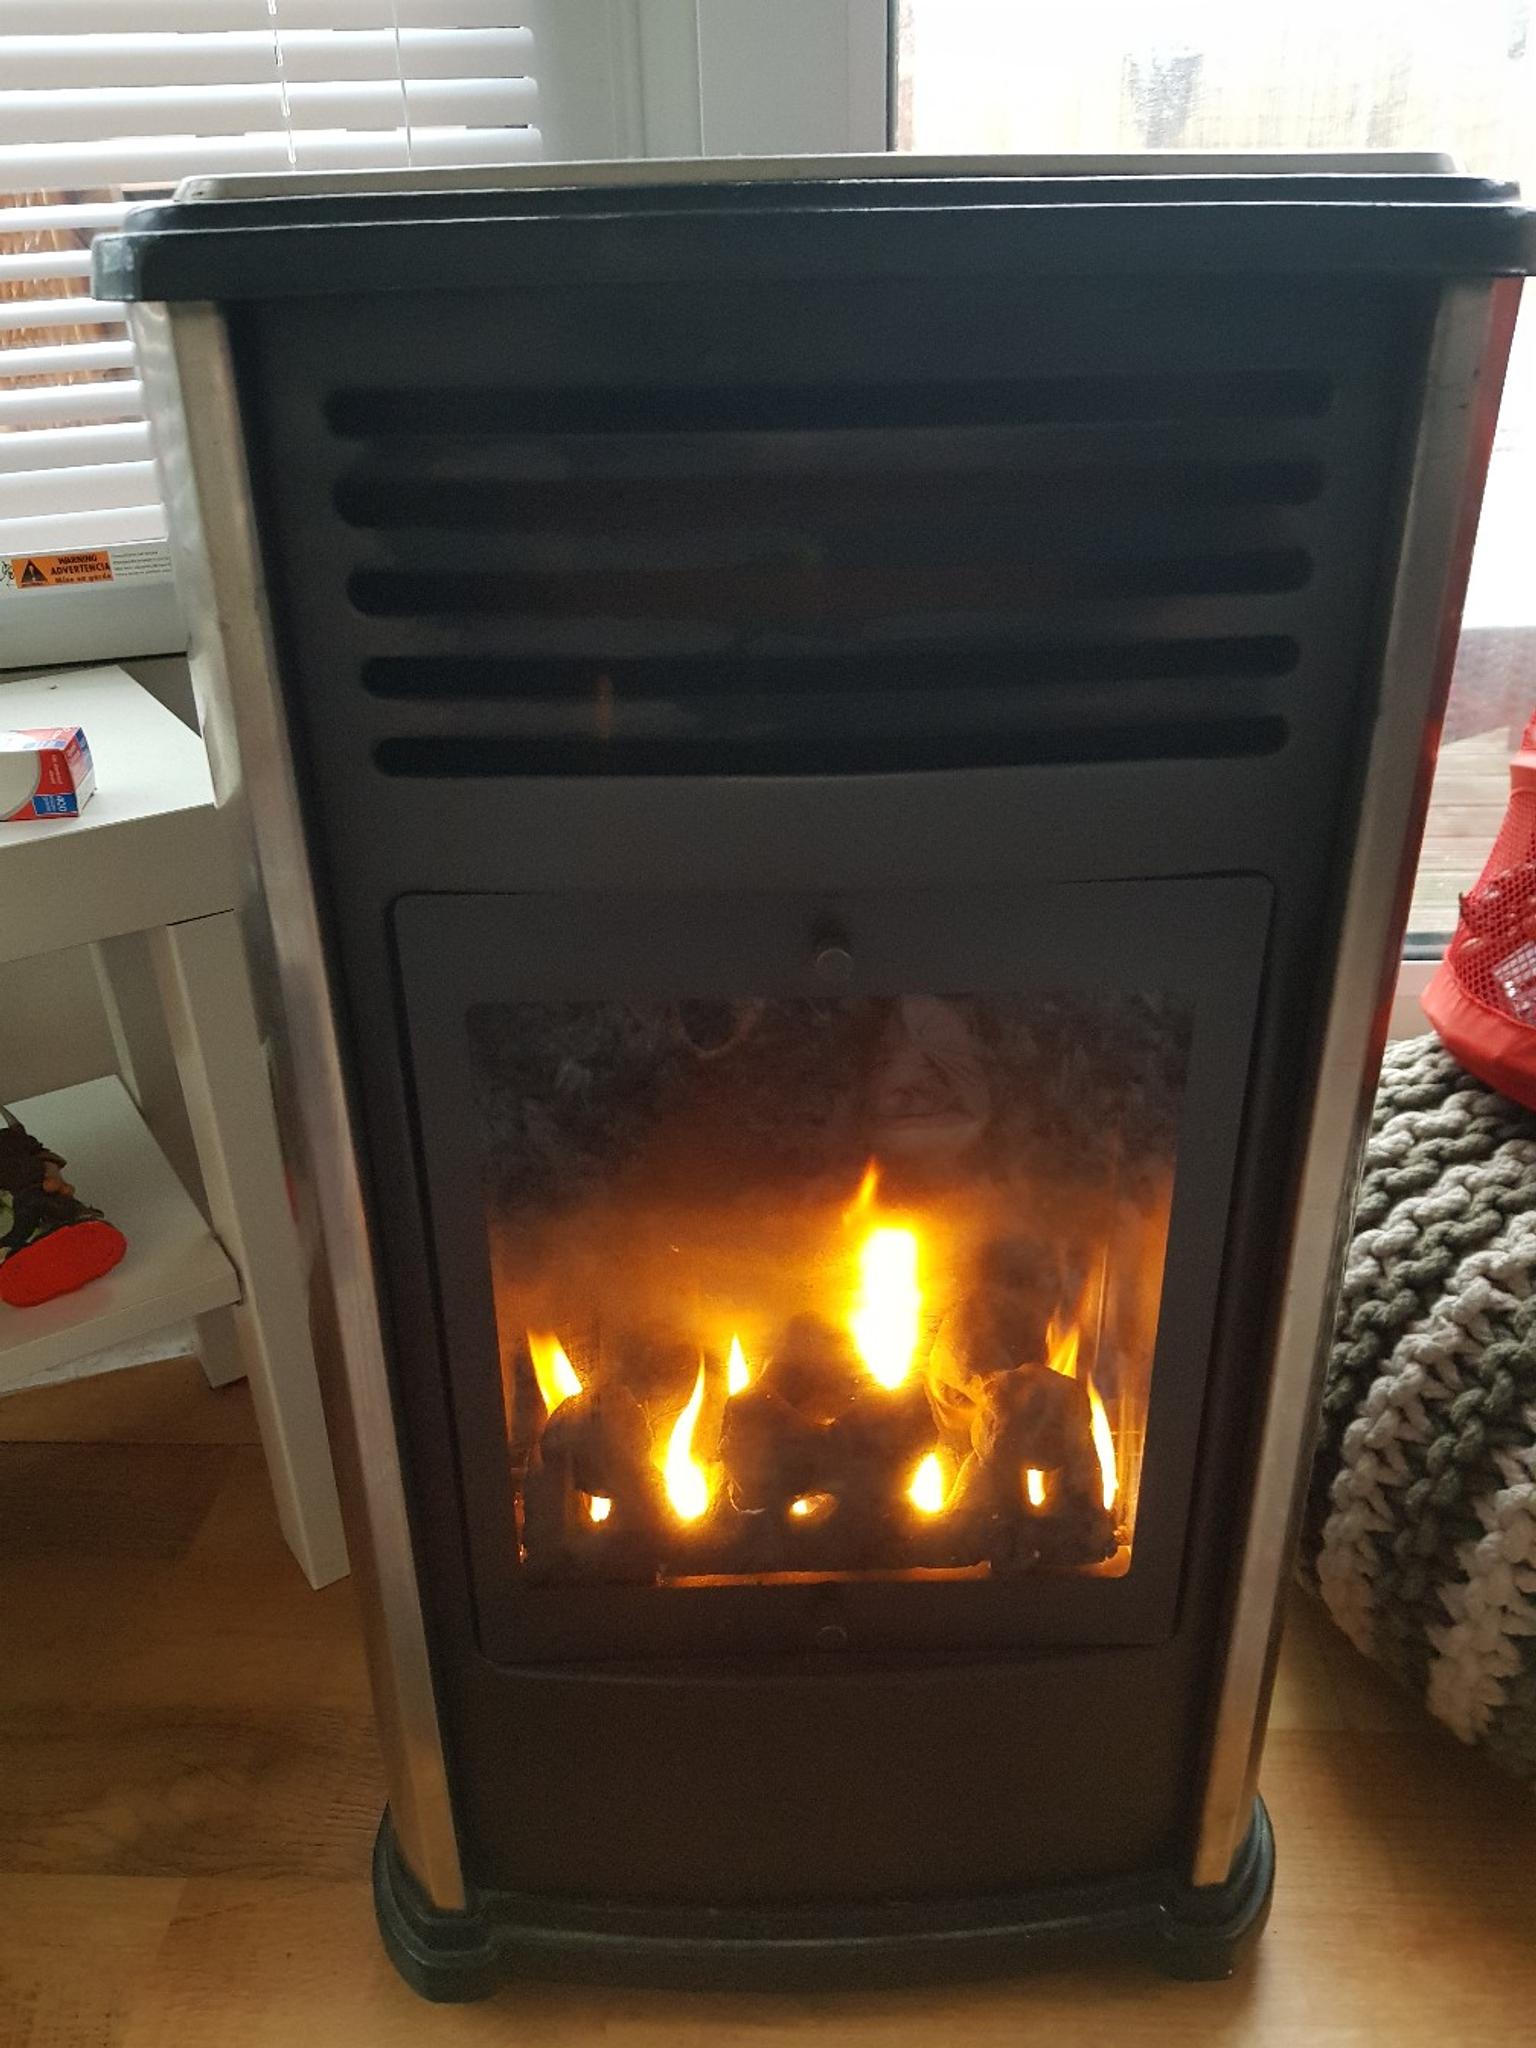 Manhattan calor gas heater in M34 Tameside for £60.00 for sale Shpock